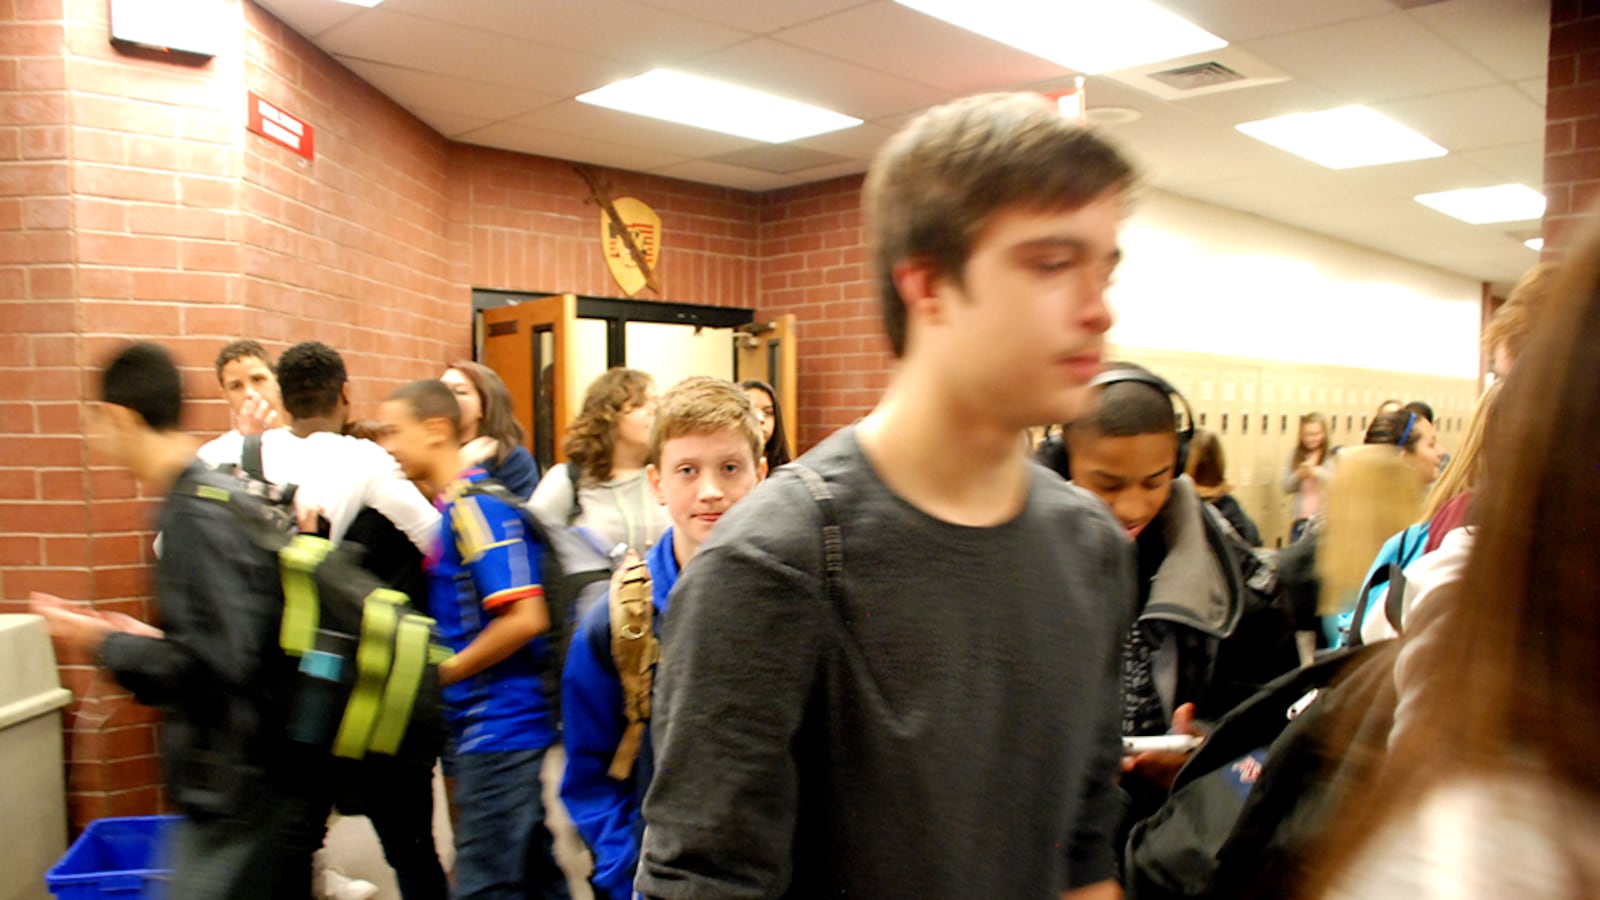 Students at Rangeview High School in Aurora walk through the hall during passing period.